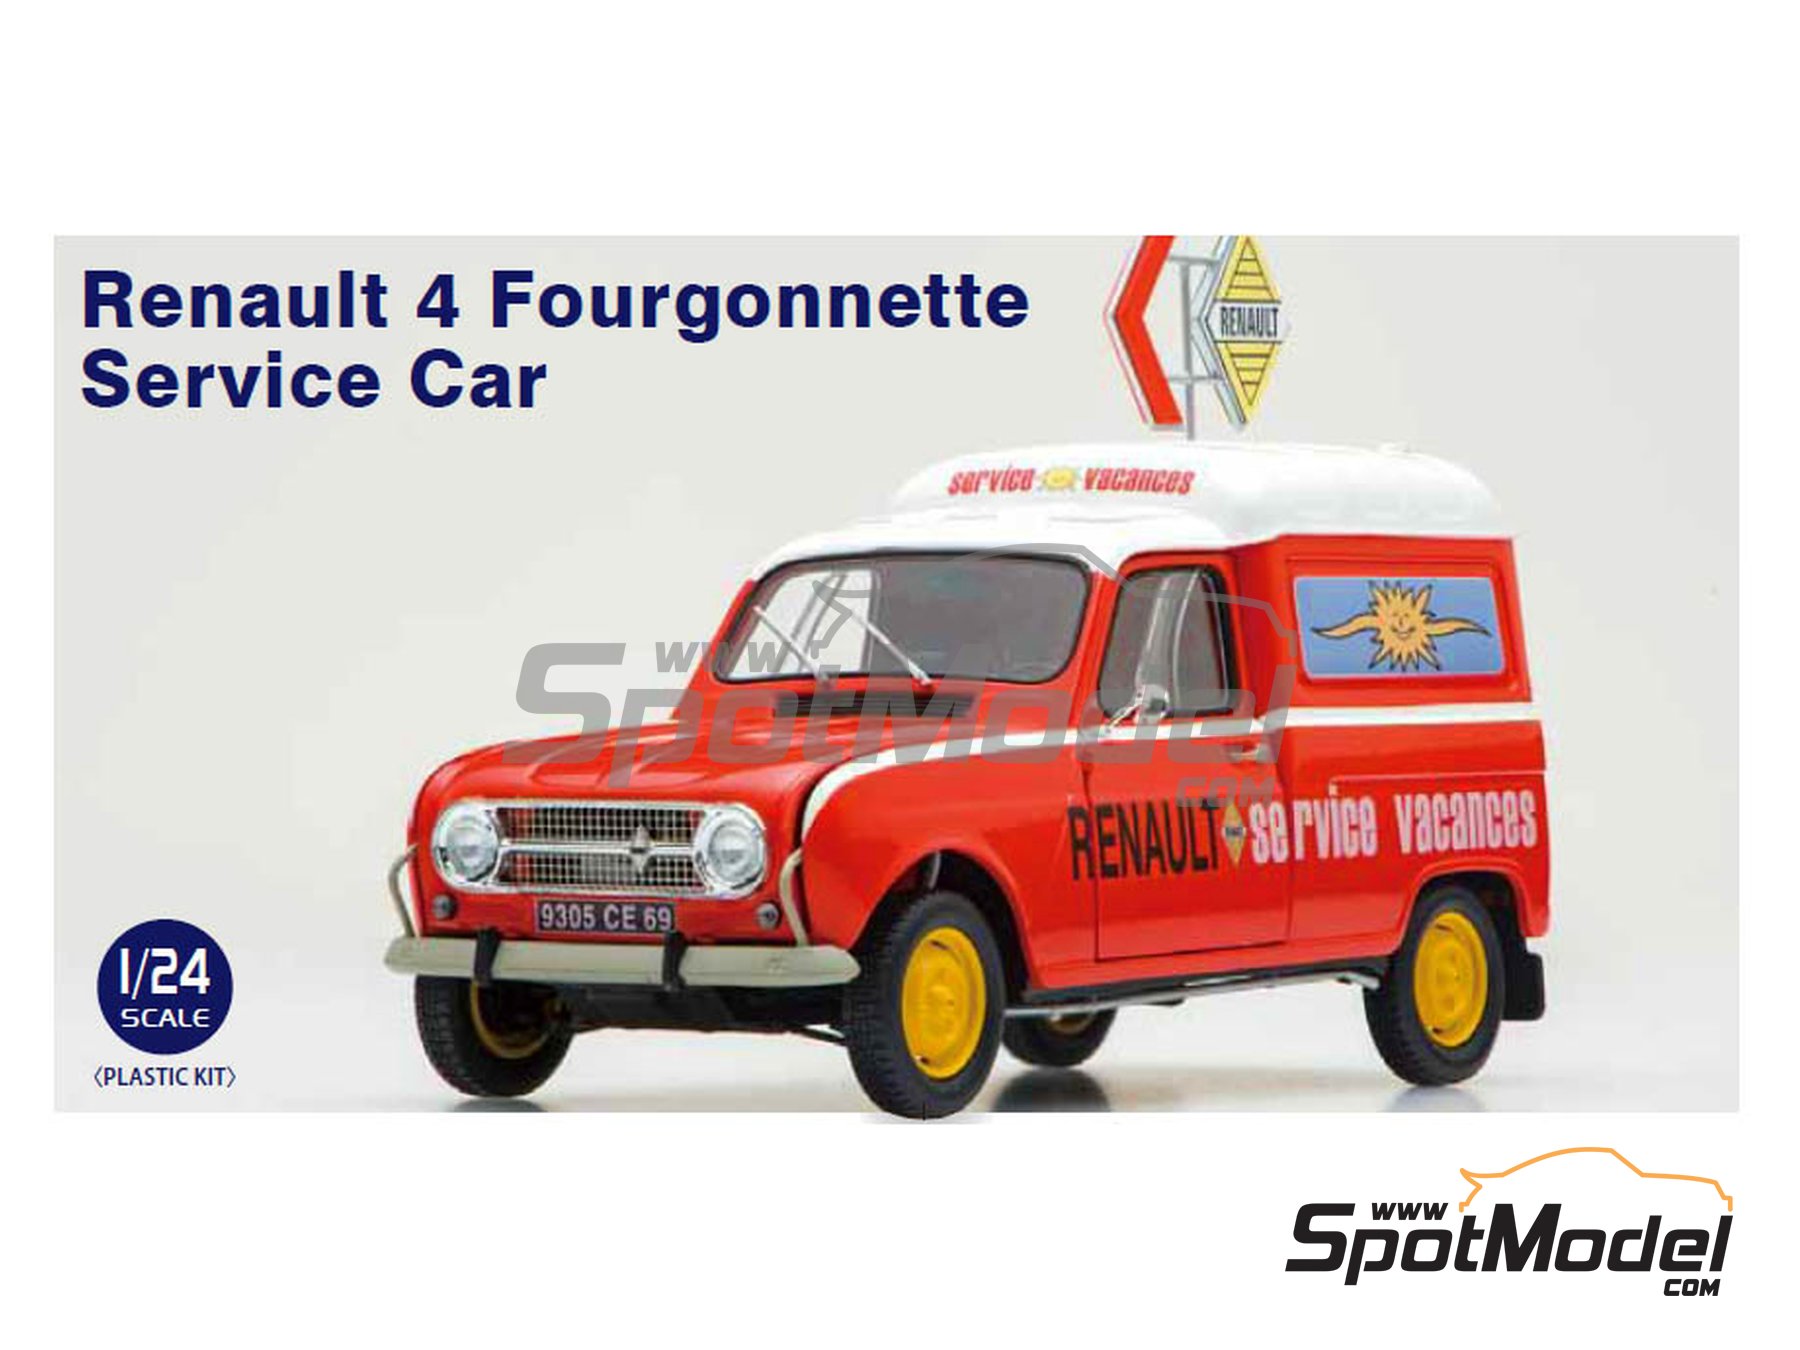 Renault 4 Fourgonnette. Car scale model kit in 1/24 scale manufactured by  Ebbro (ref. EBR25012, also 4526175250126 and 25012)